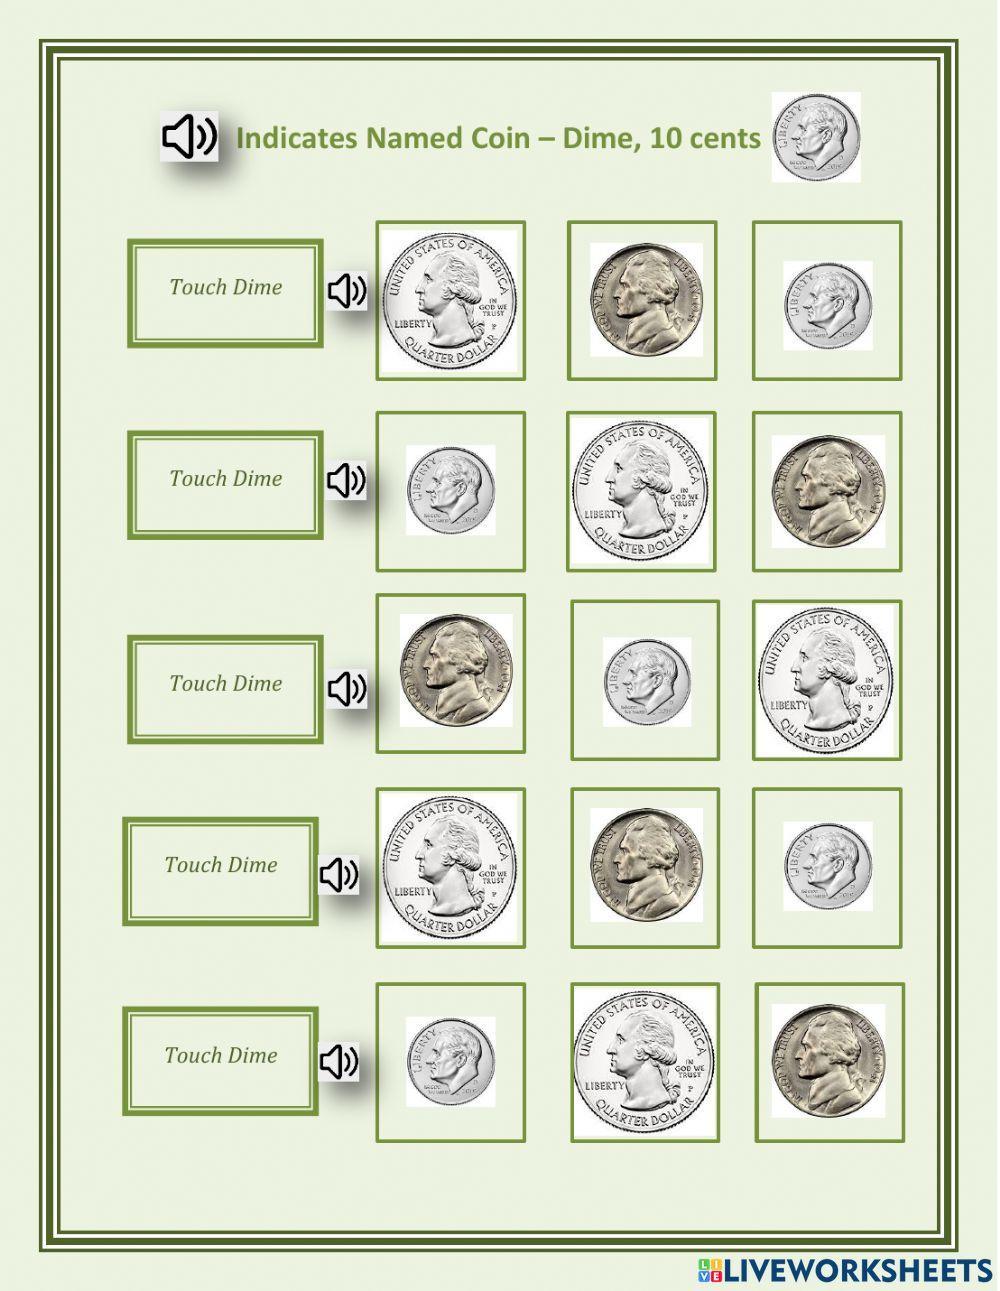 Indicates named coin - dime - 1.03 - George